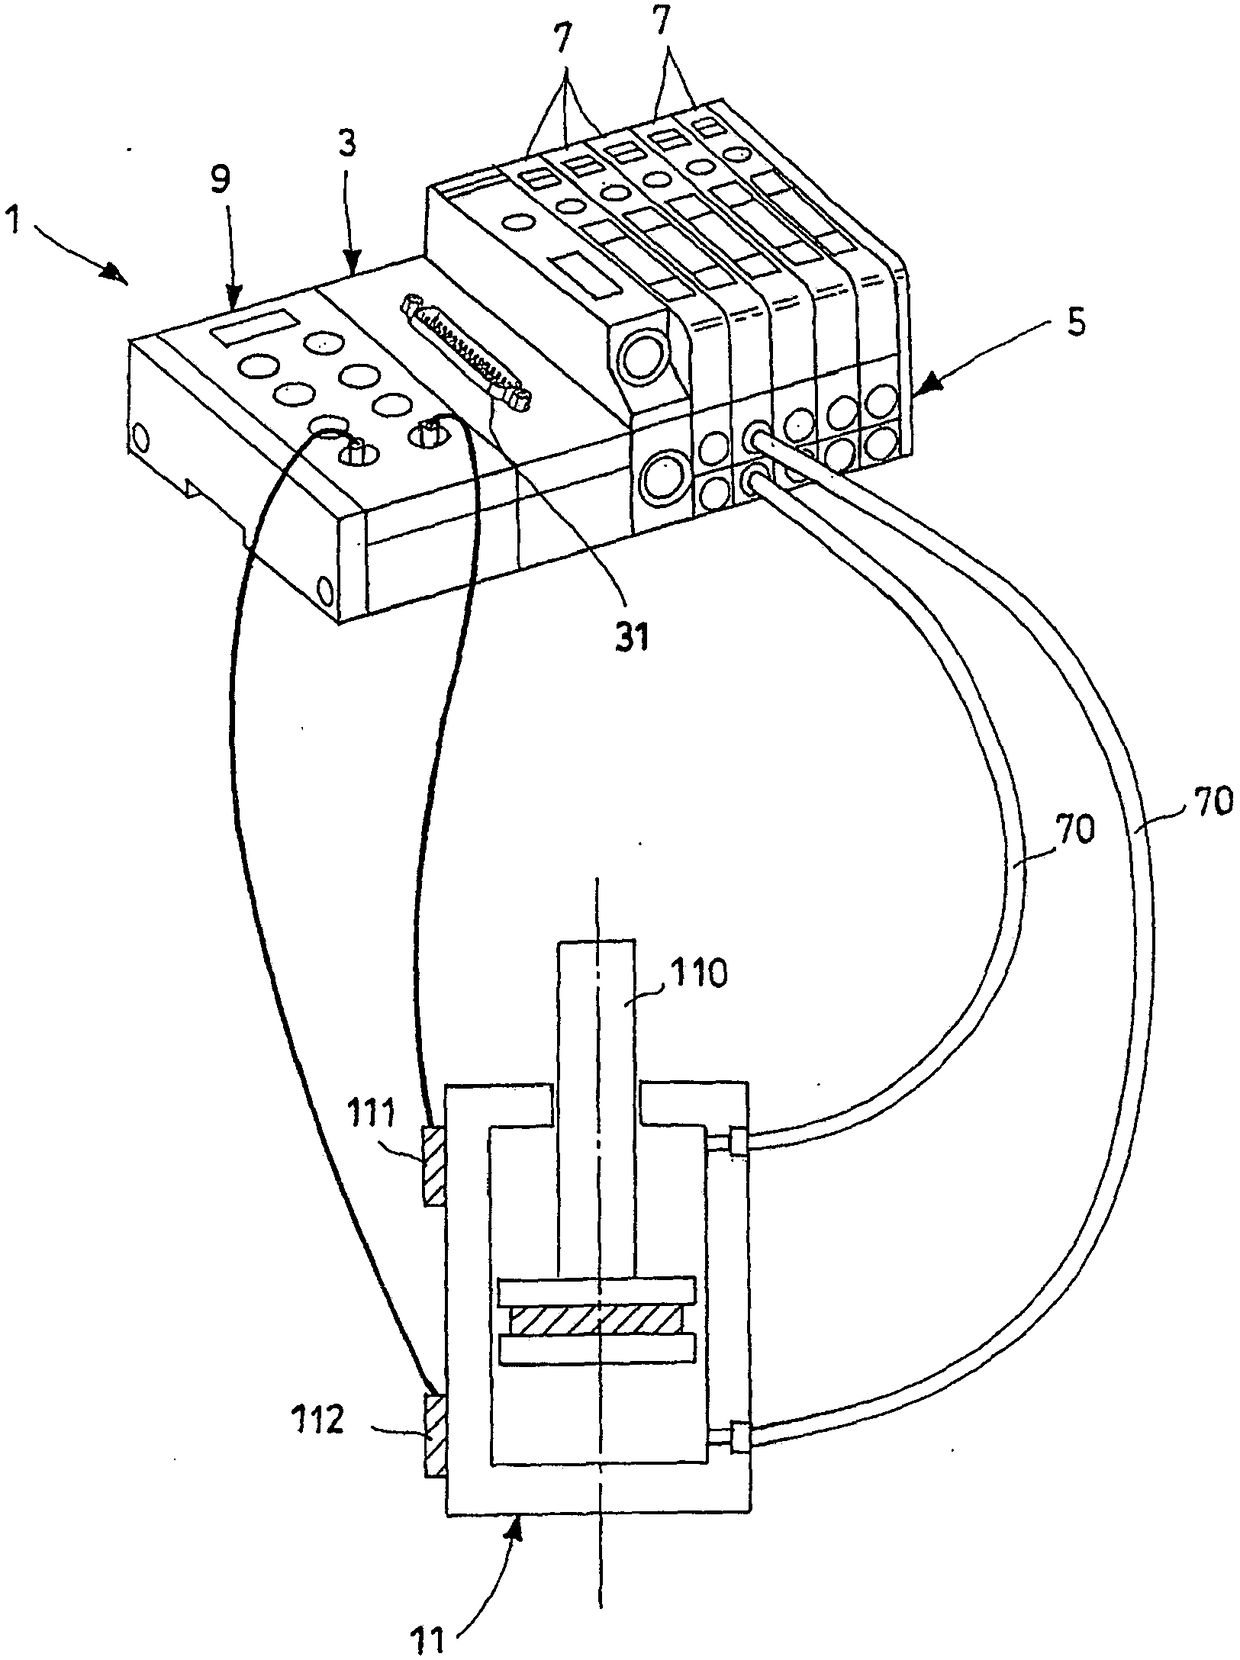 Modular control device for solenoid valve islands, particularly for the actuation of actuators